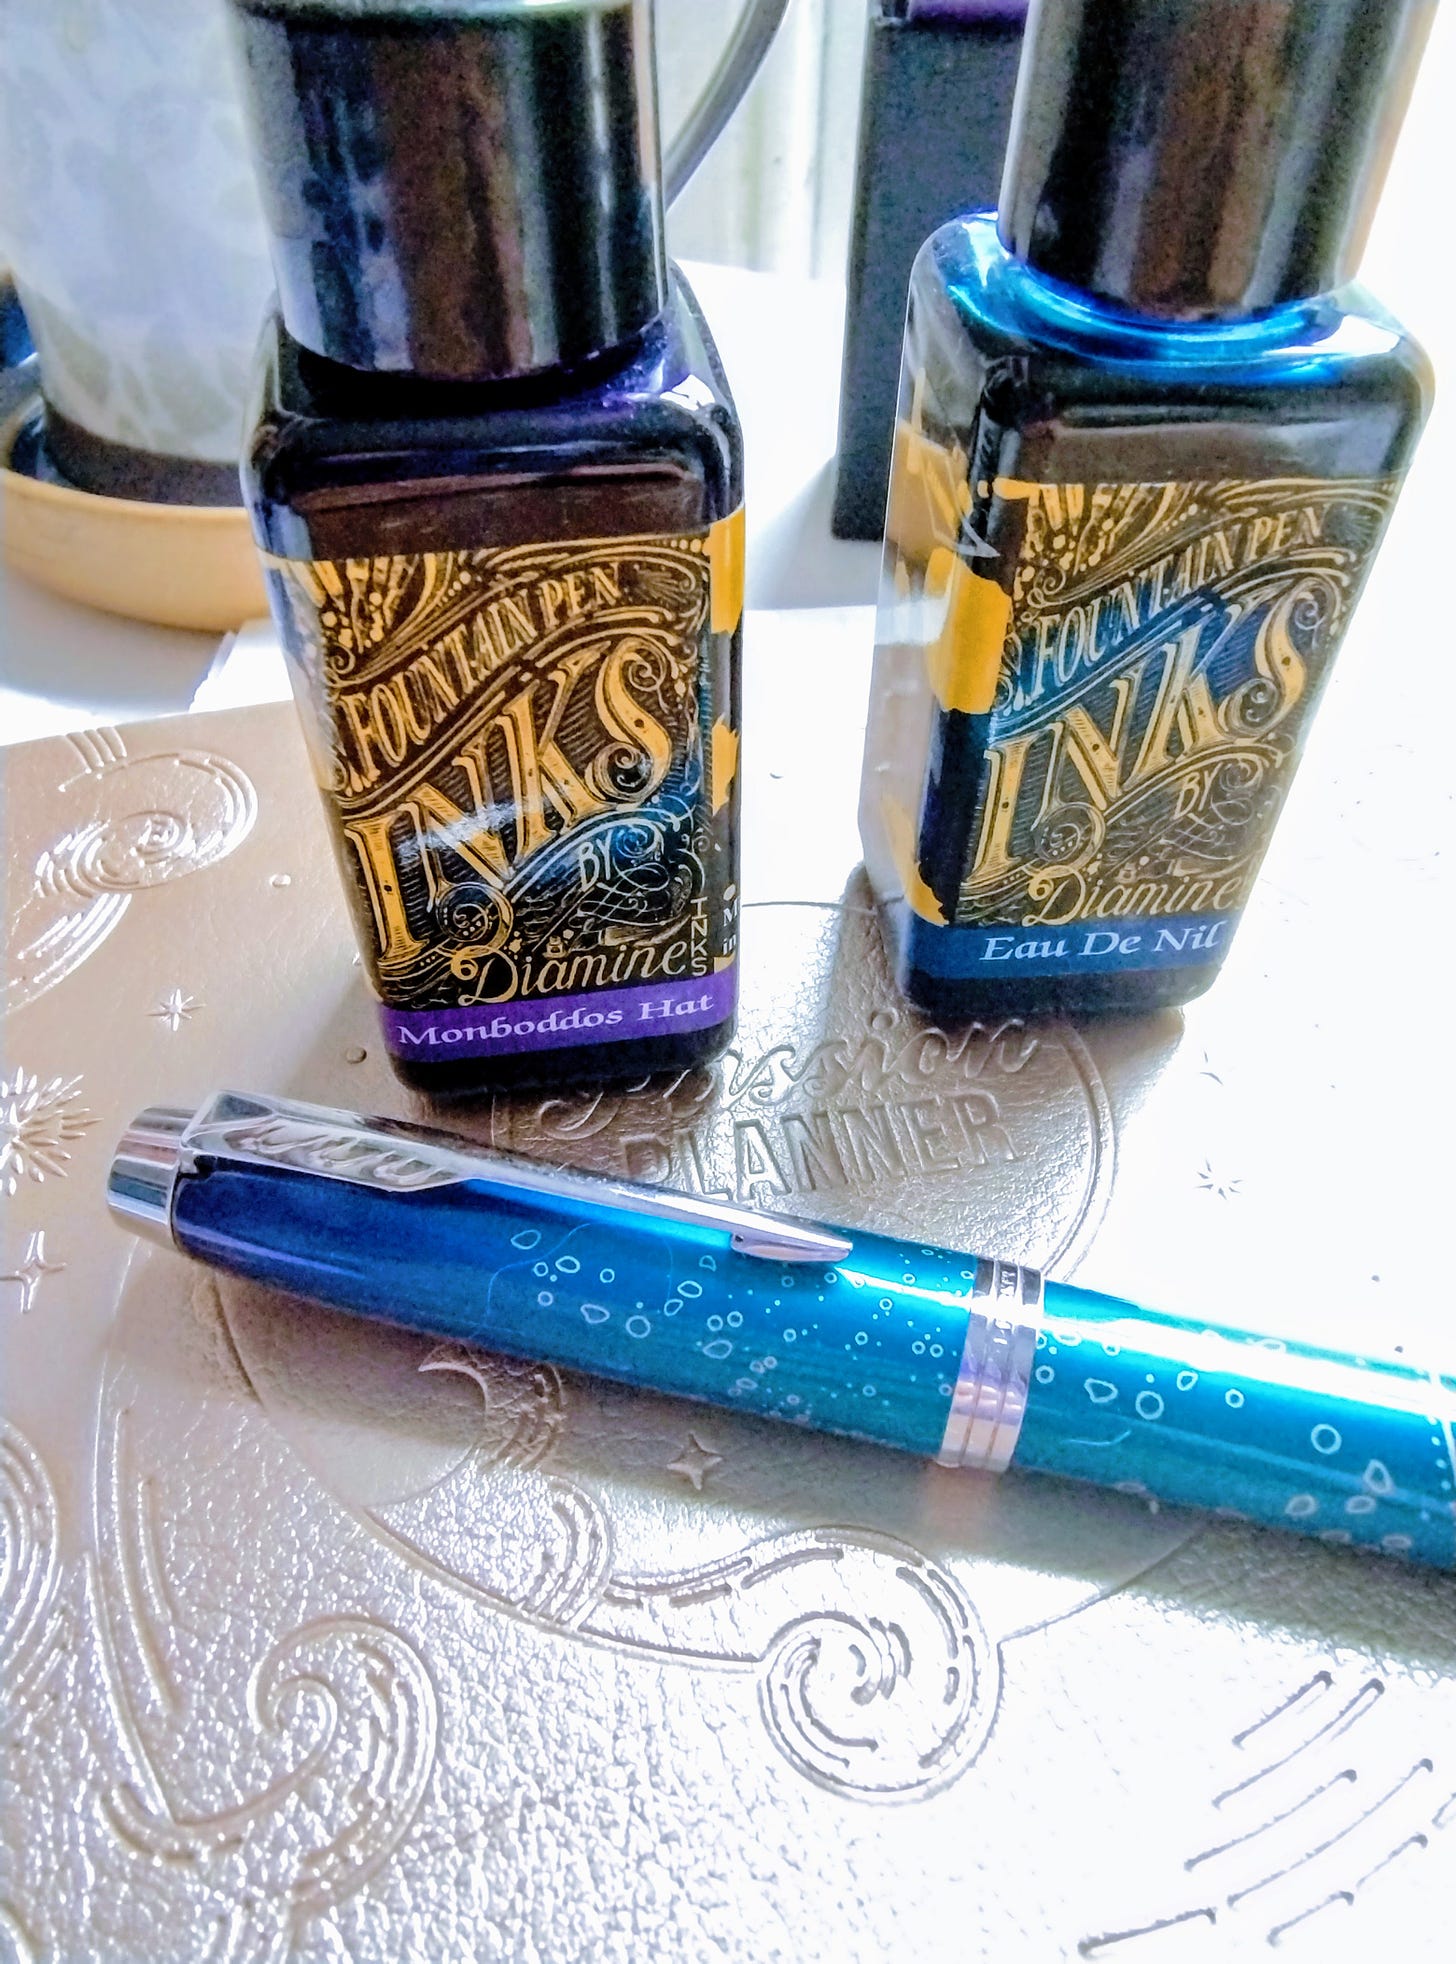 two inks and a fountain pen. Both are coloured inks, one is called Monboddos's Hat